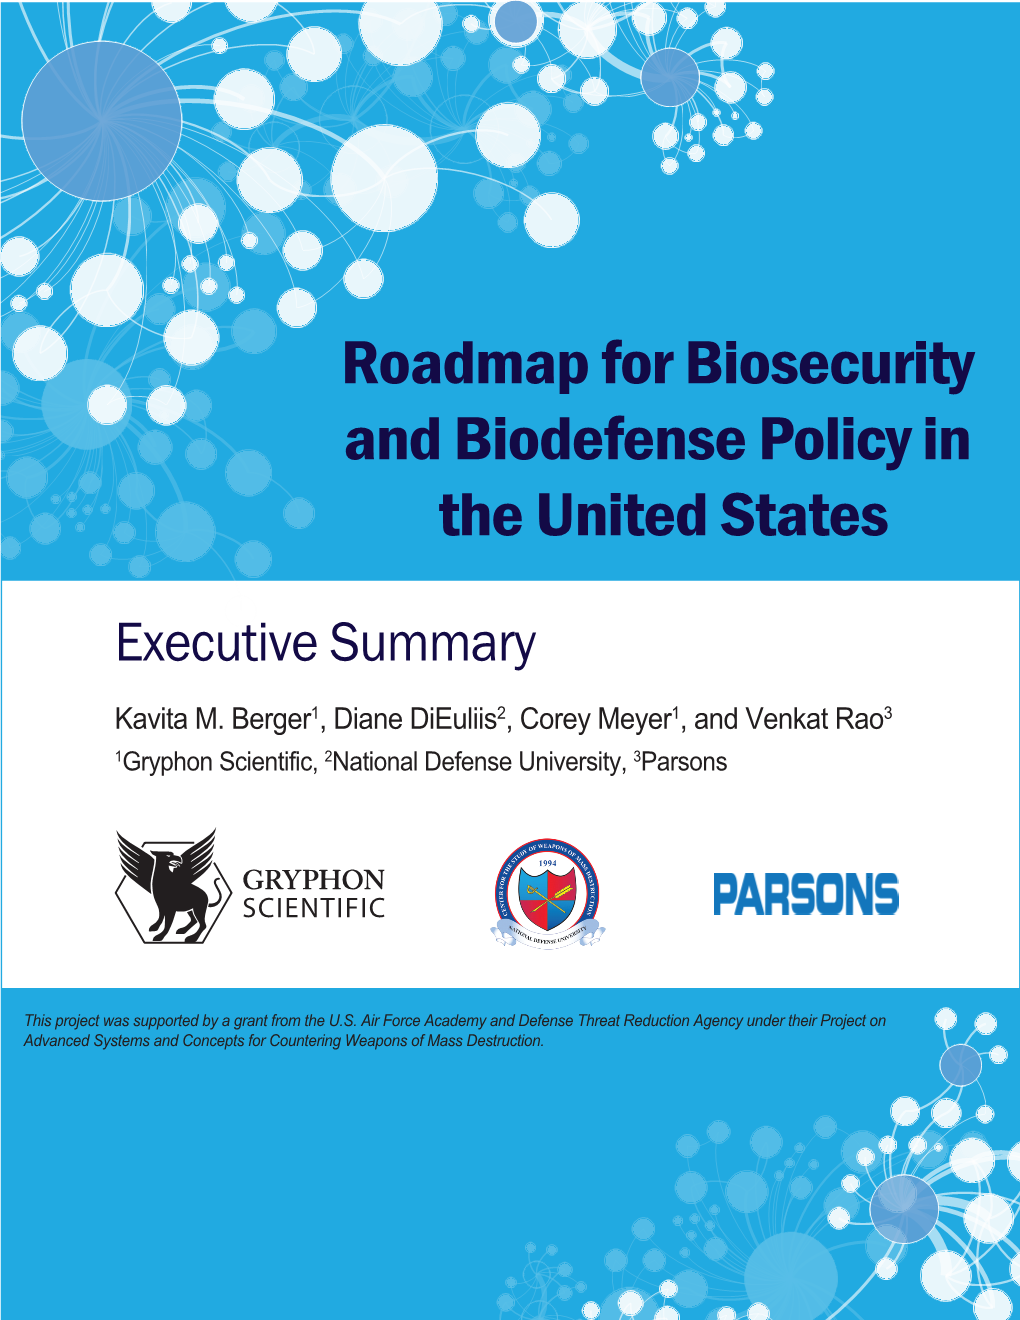 Roadmap for Biosecurity and Biodefense Policy in the United States